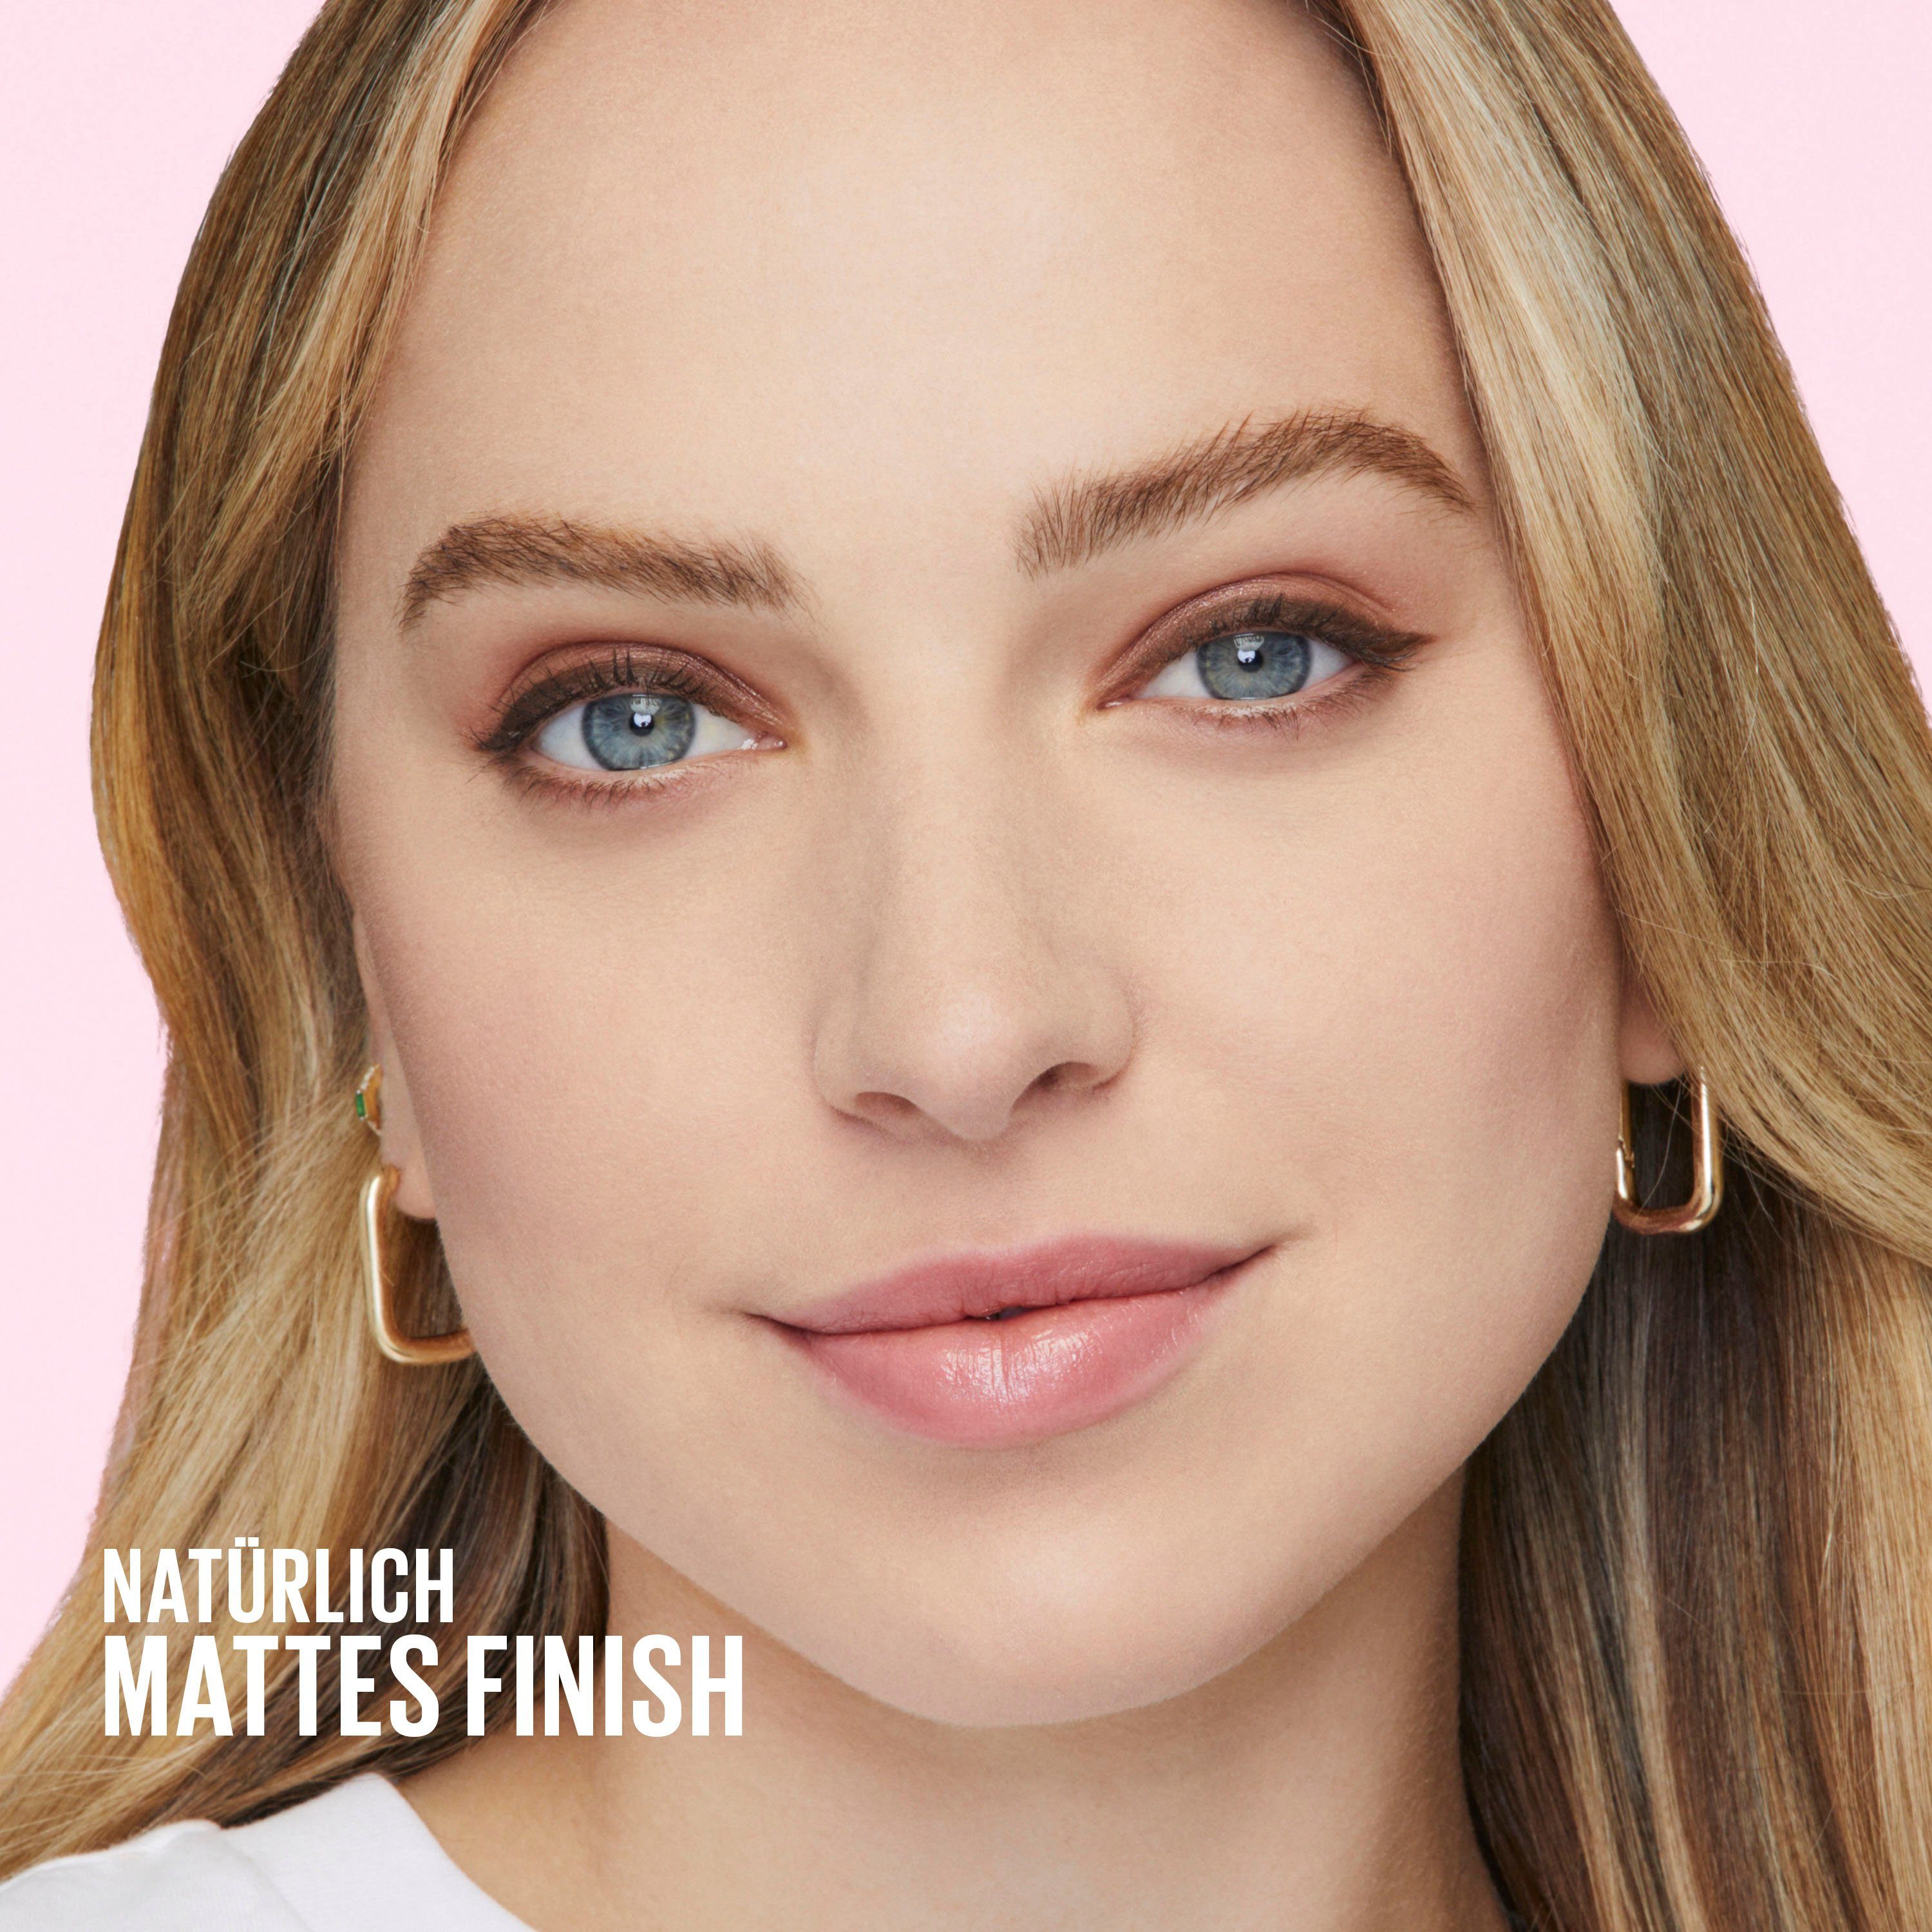 Matte Instant Perfector Foundation NEW Light MAYBELLINE 1 YORK